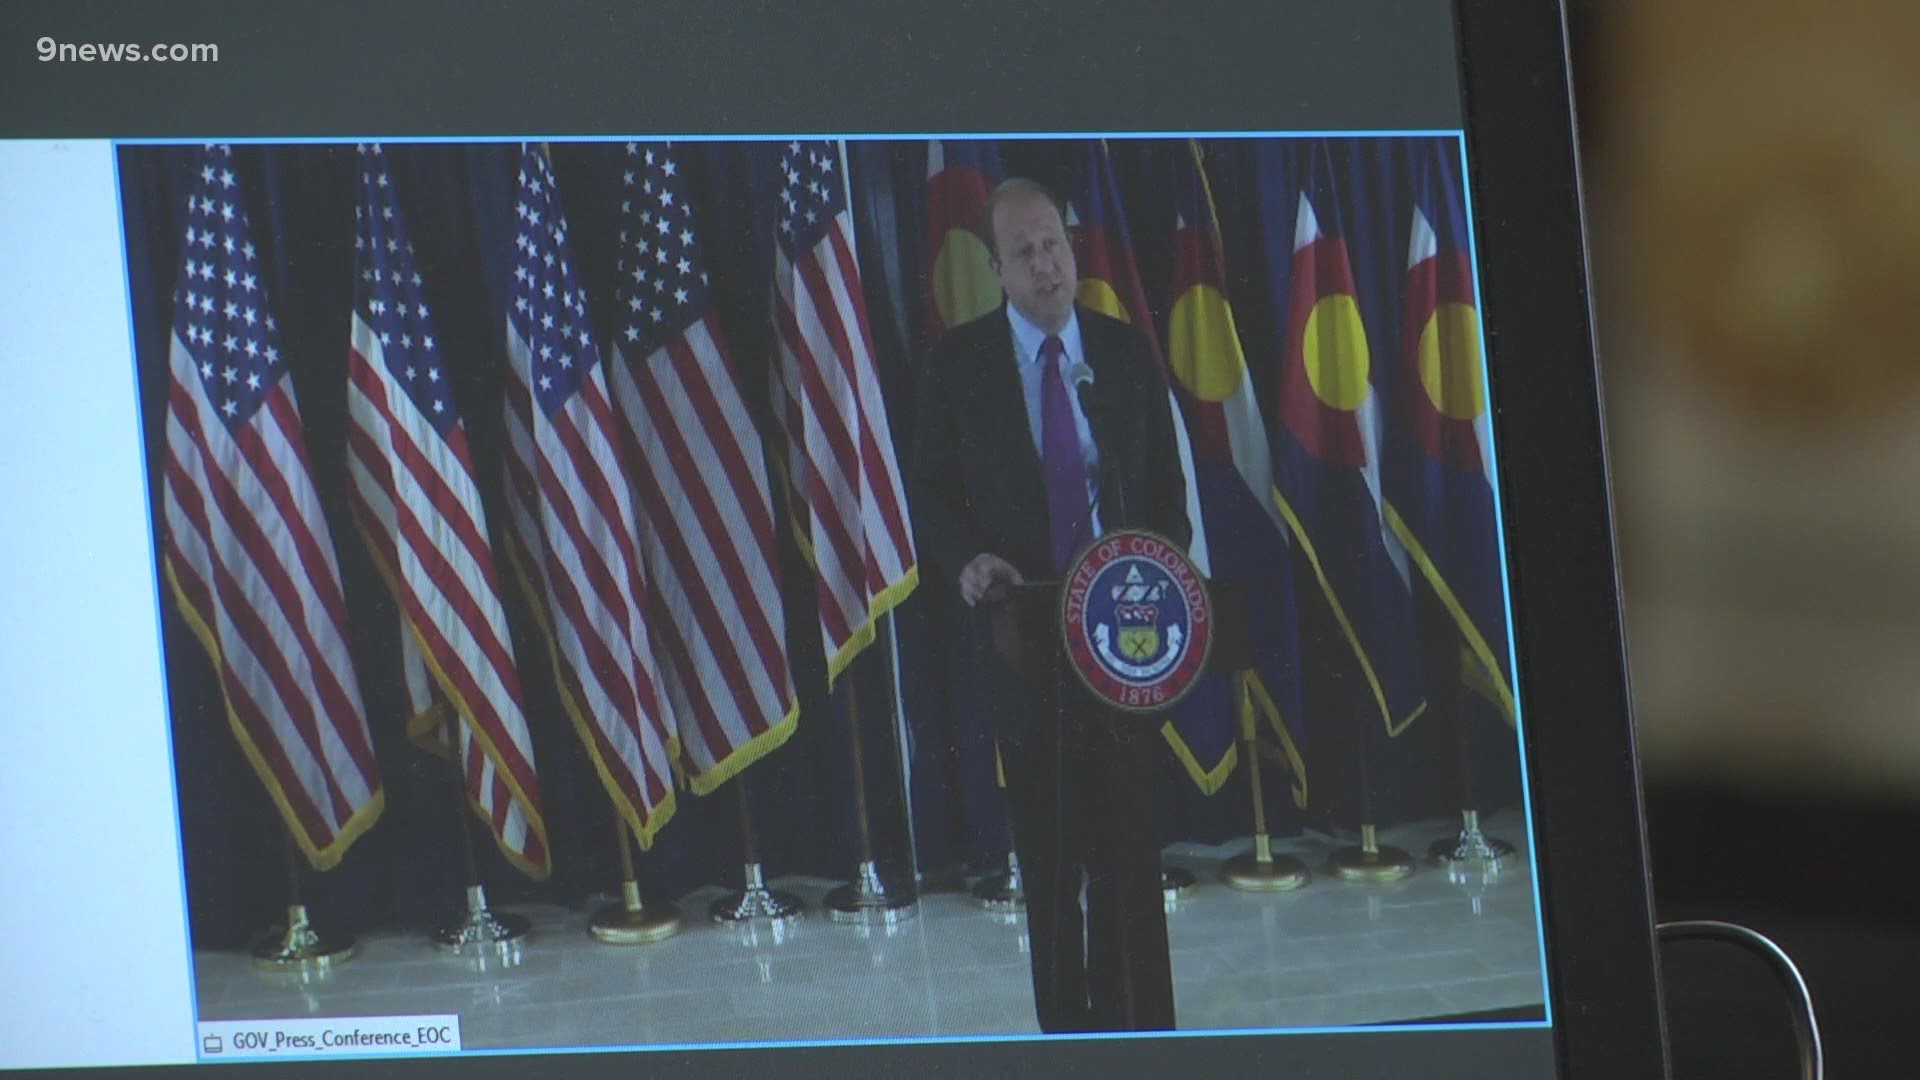 Gov. Jared Polis (D-Colorado) asked Coloradans to continue wearing masks and practicing social distancing.